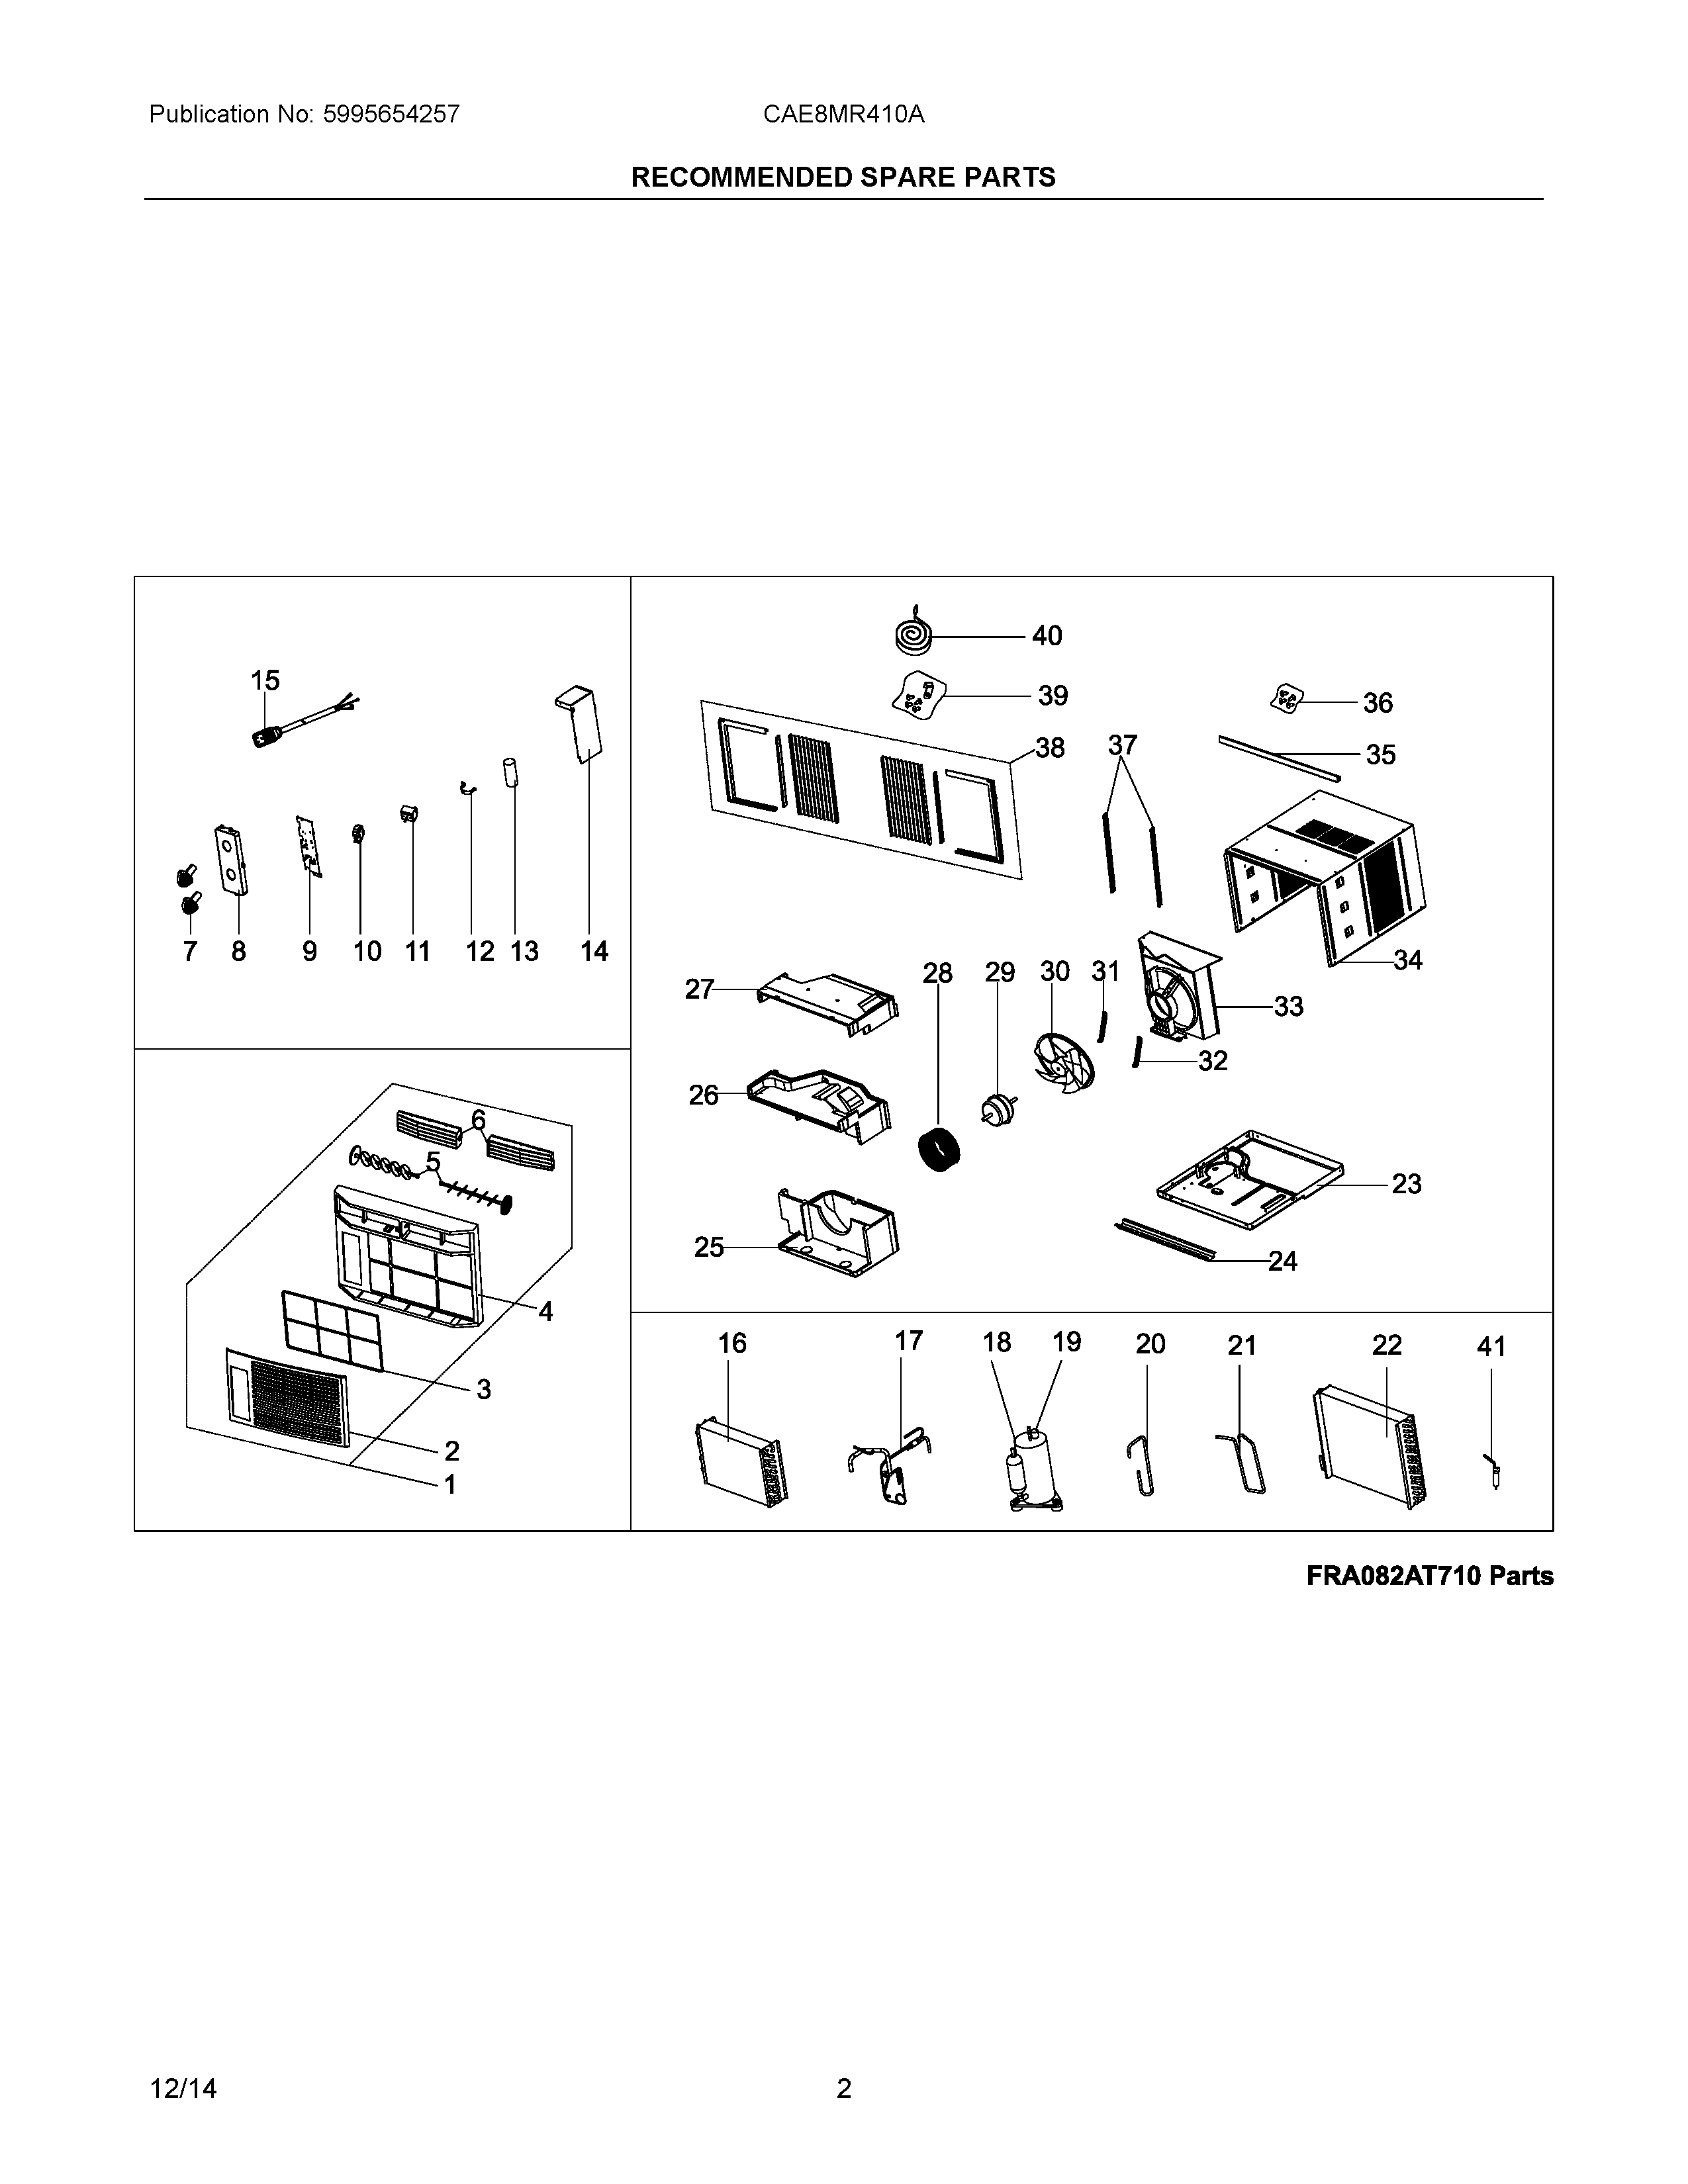 02 - RECOMMENDED SPARE PARTS